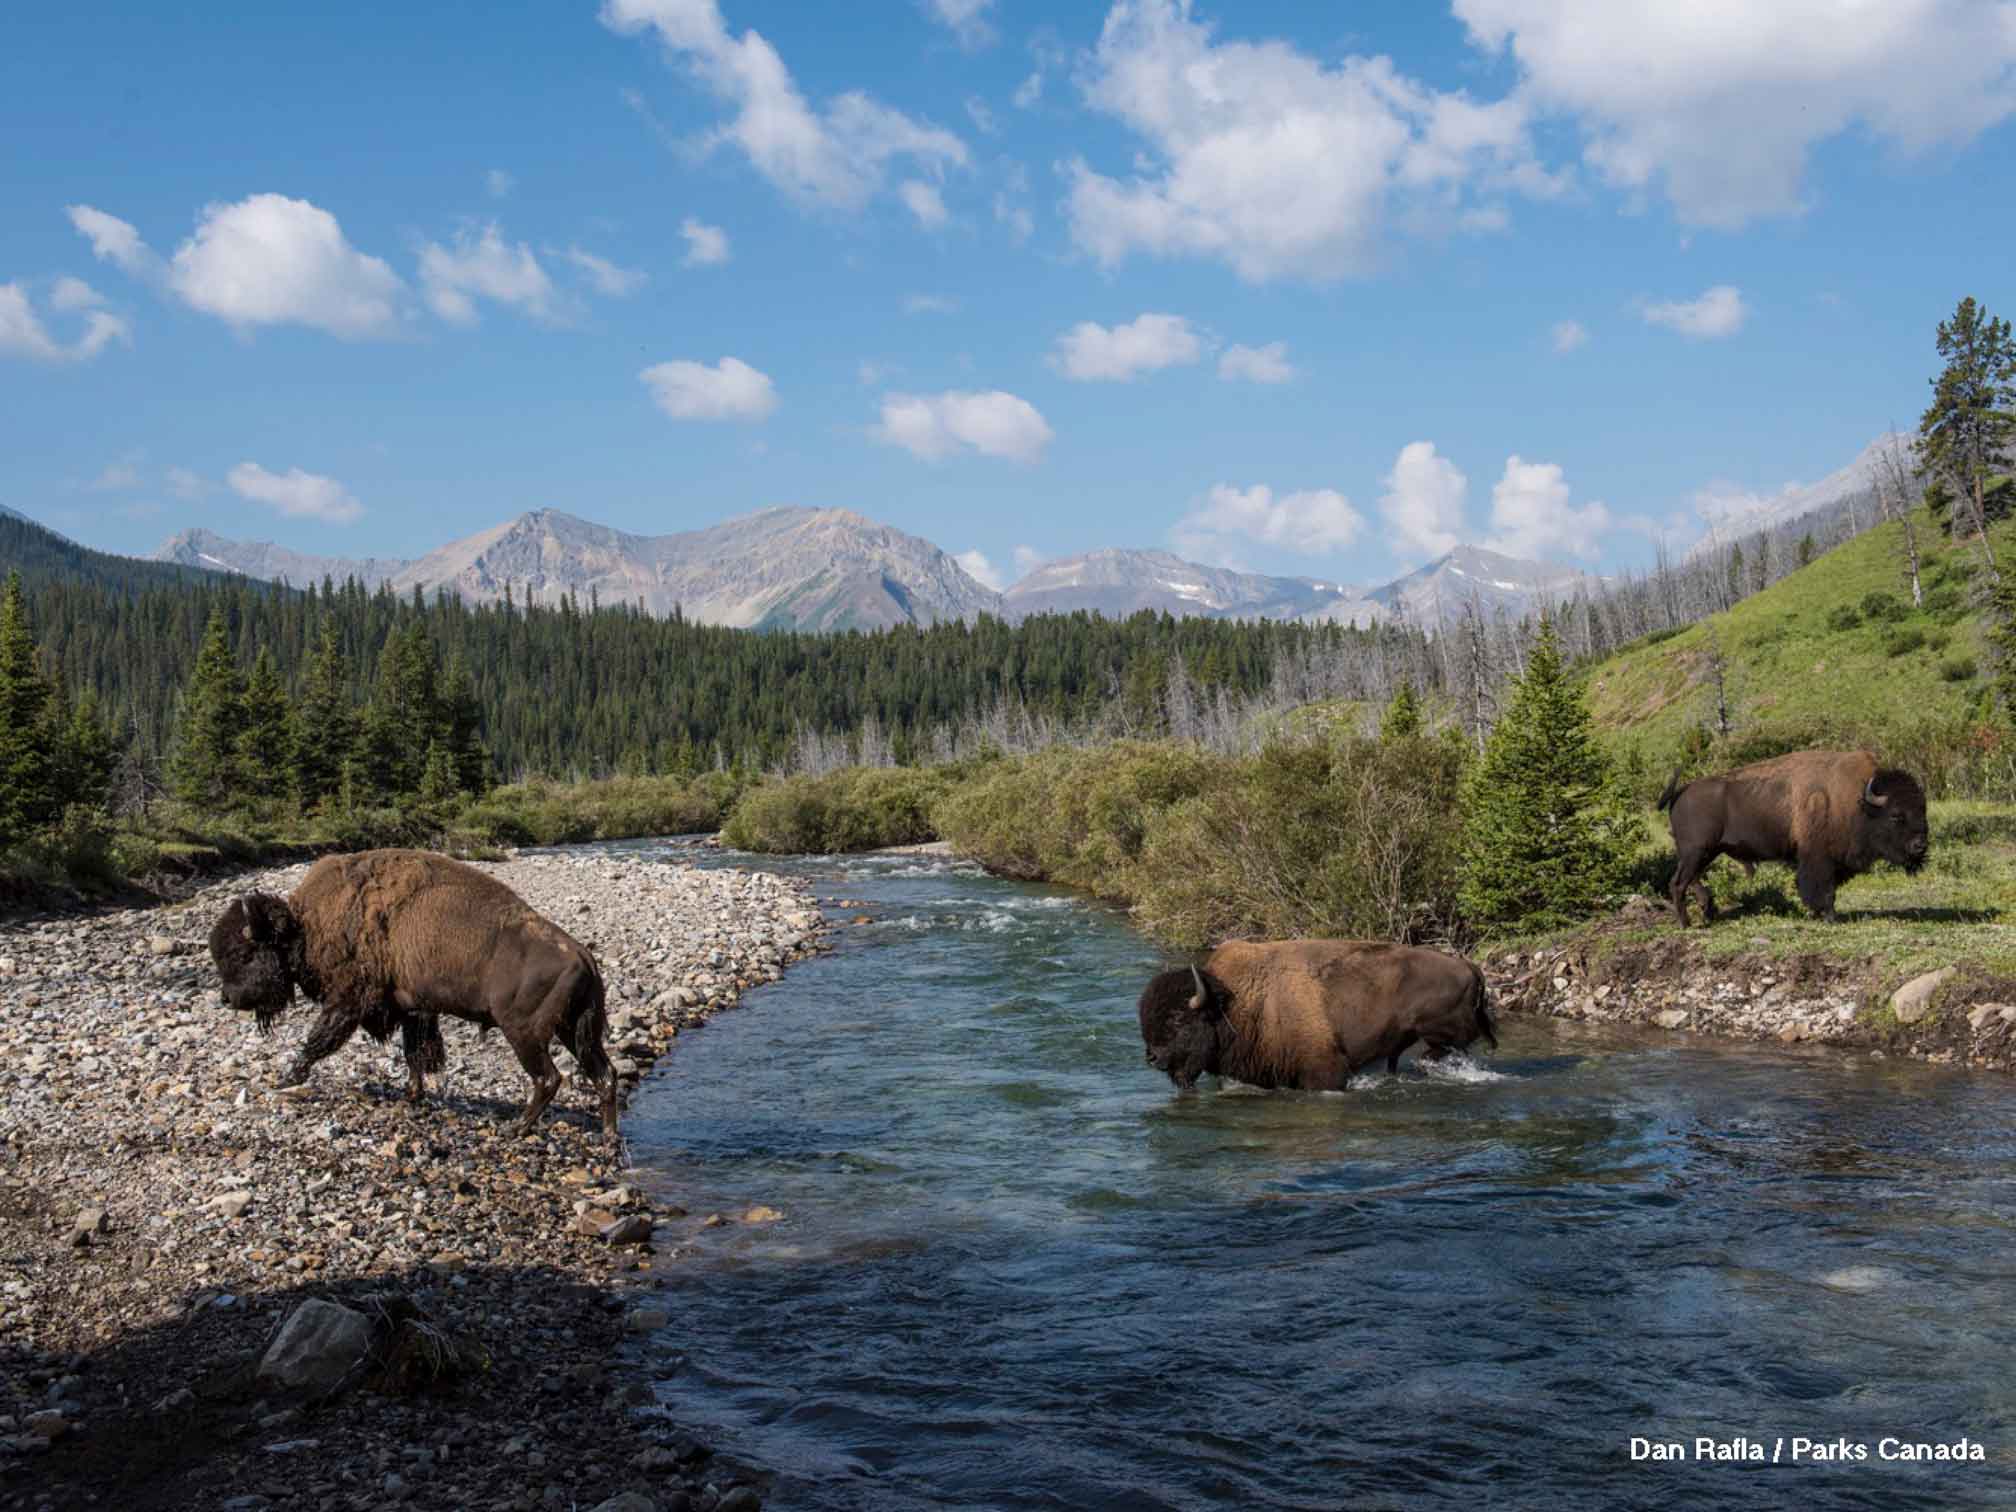 Bison cross the river in Banff National Park, representing some of the wild adventures that can be had roaming the area